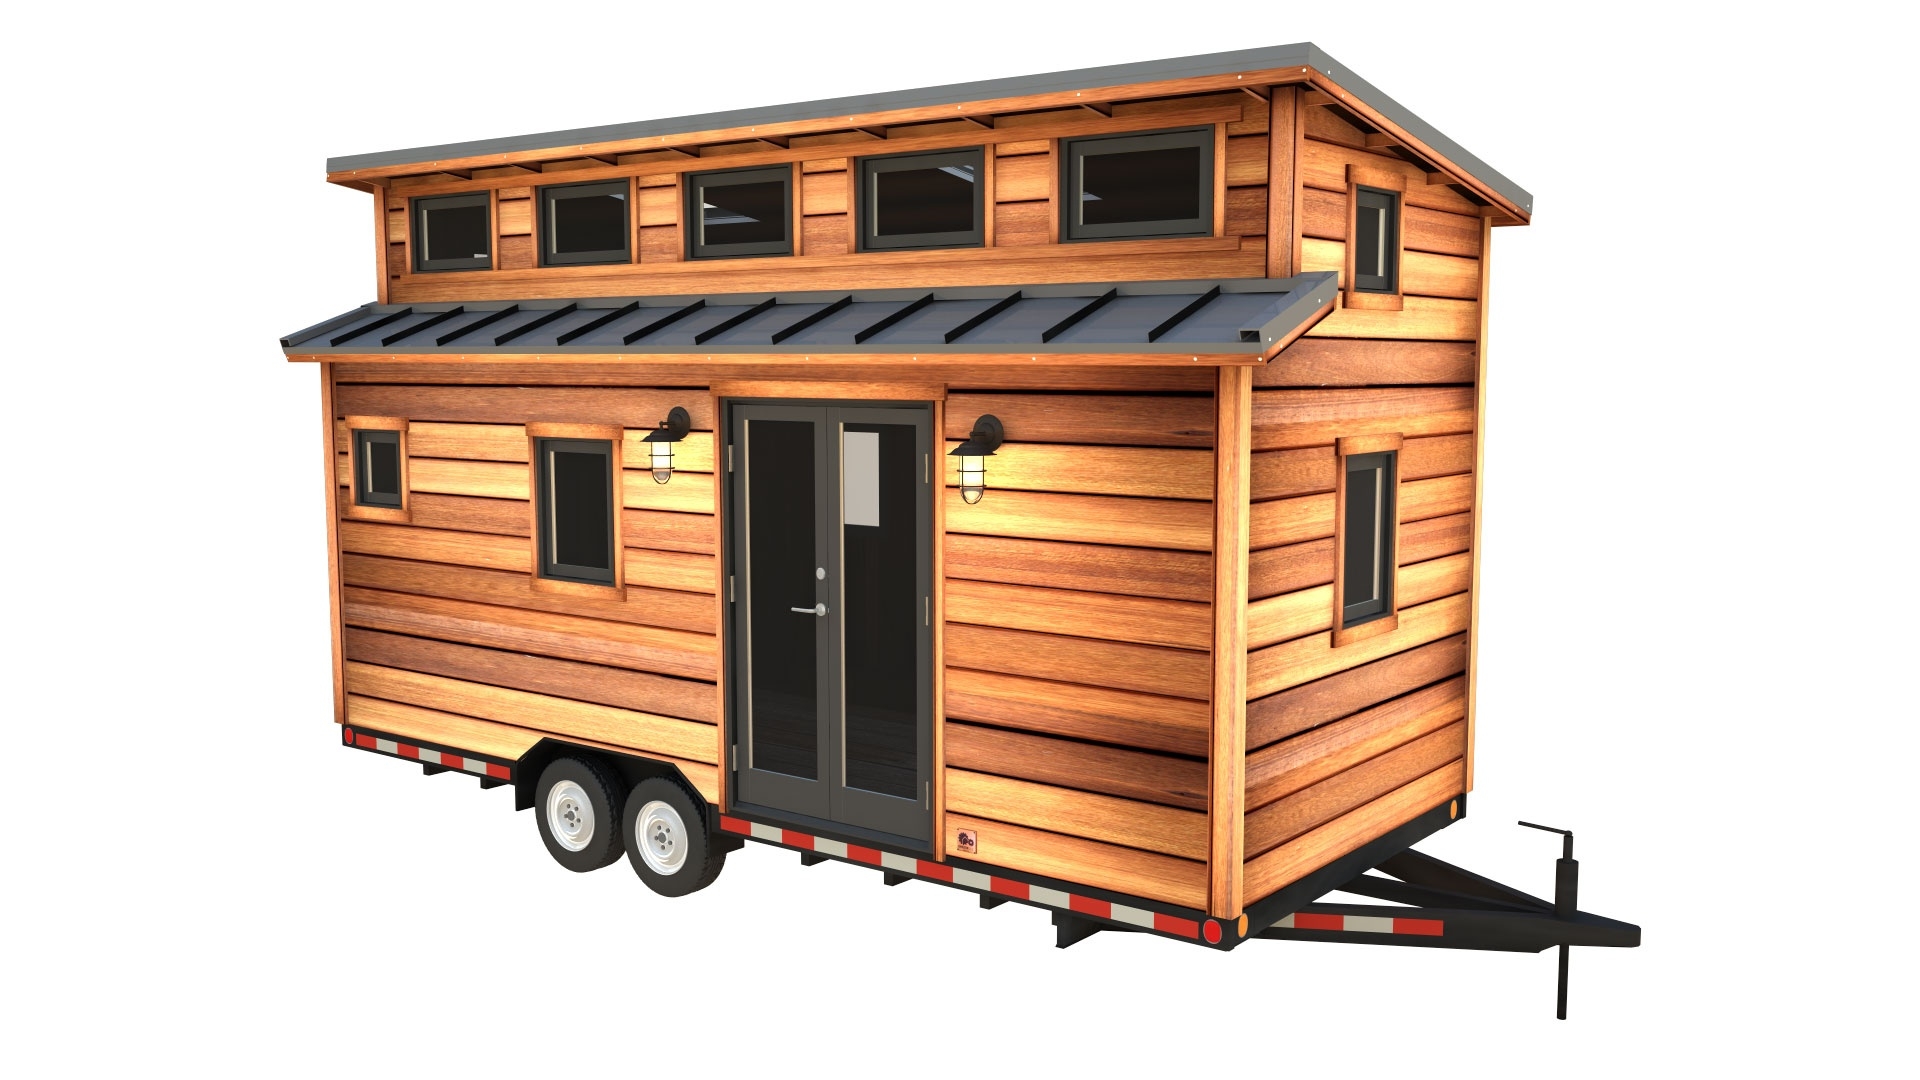 Best the cider box: modern tiny house plans for your home on wheels inside picture of 20x8 houses models plans